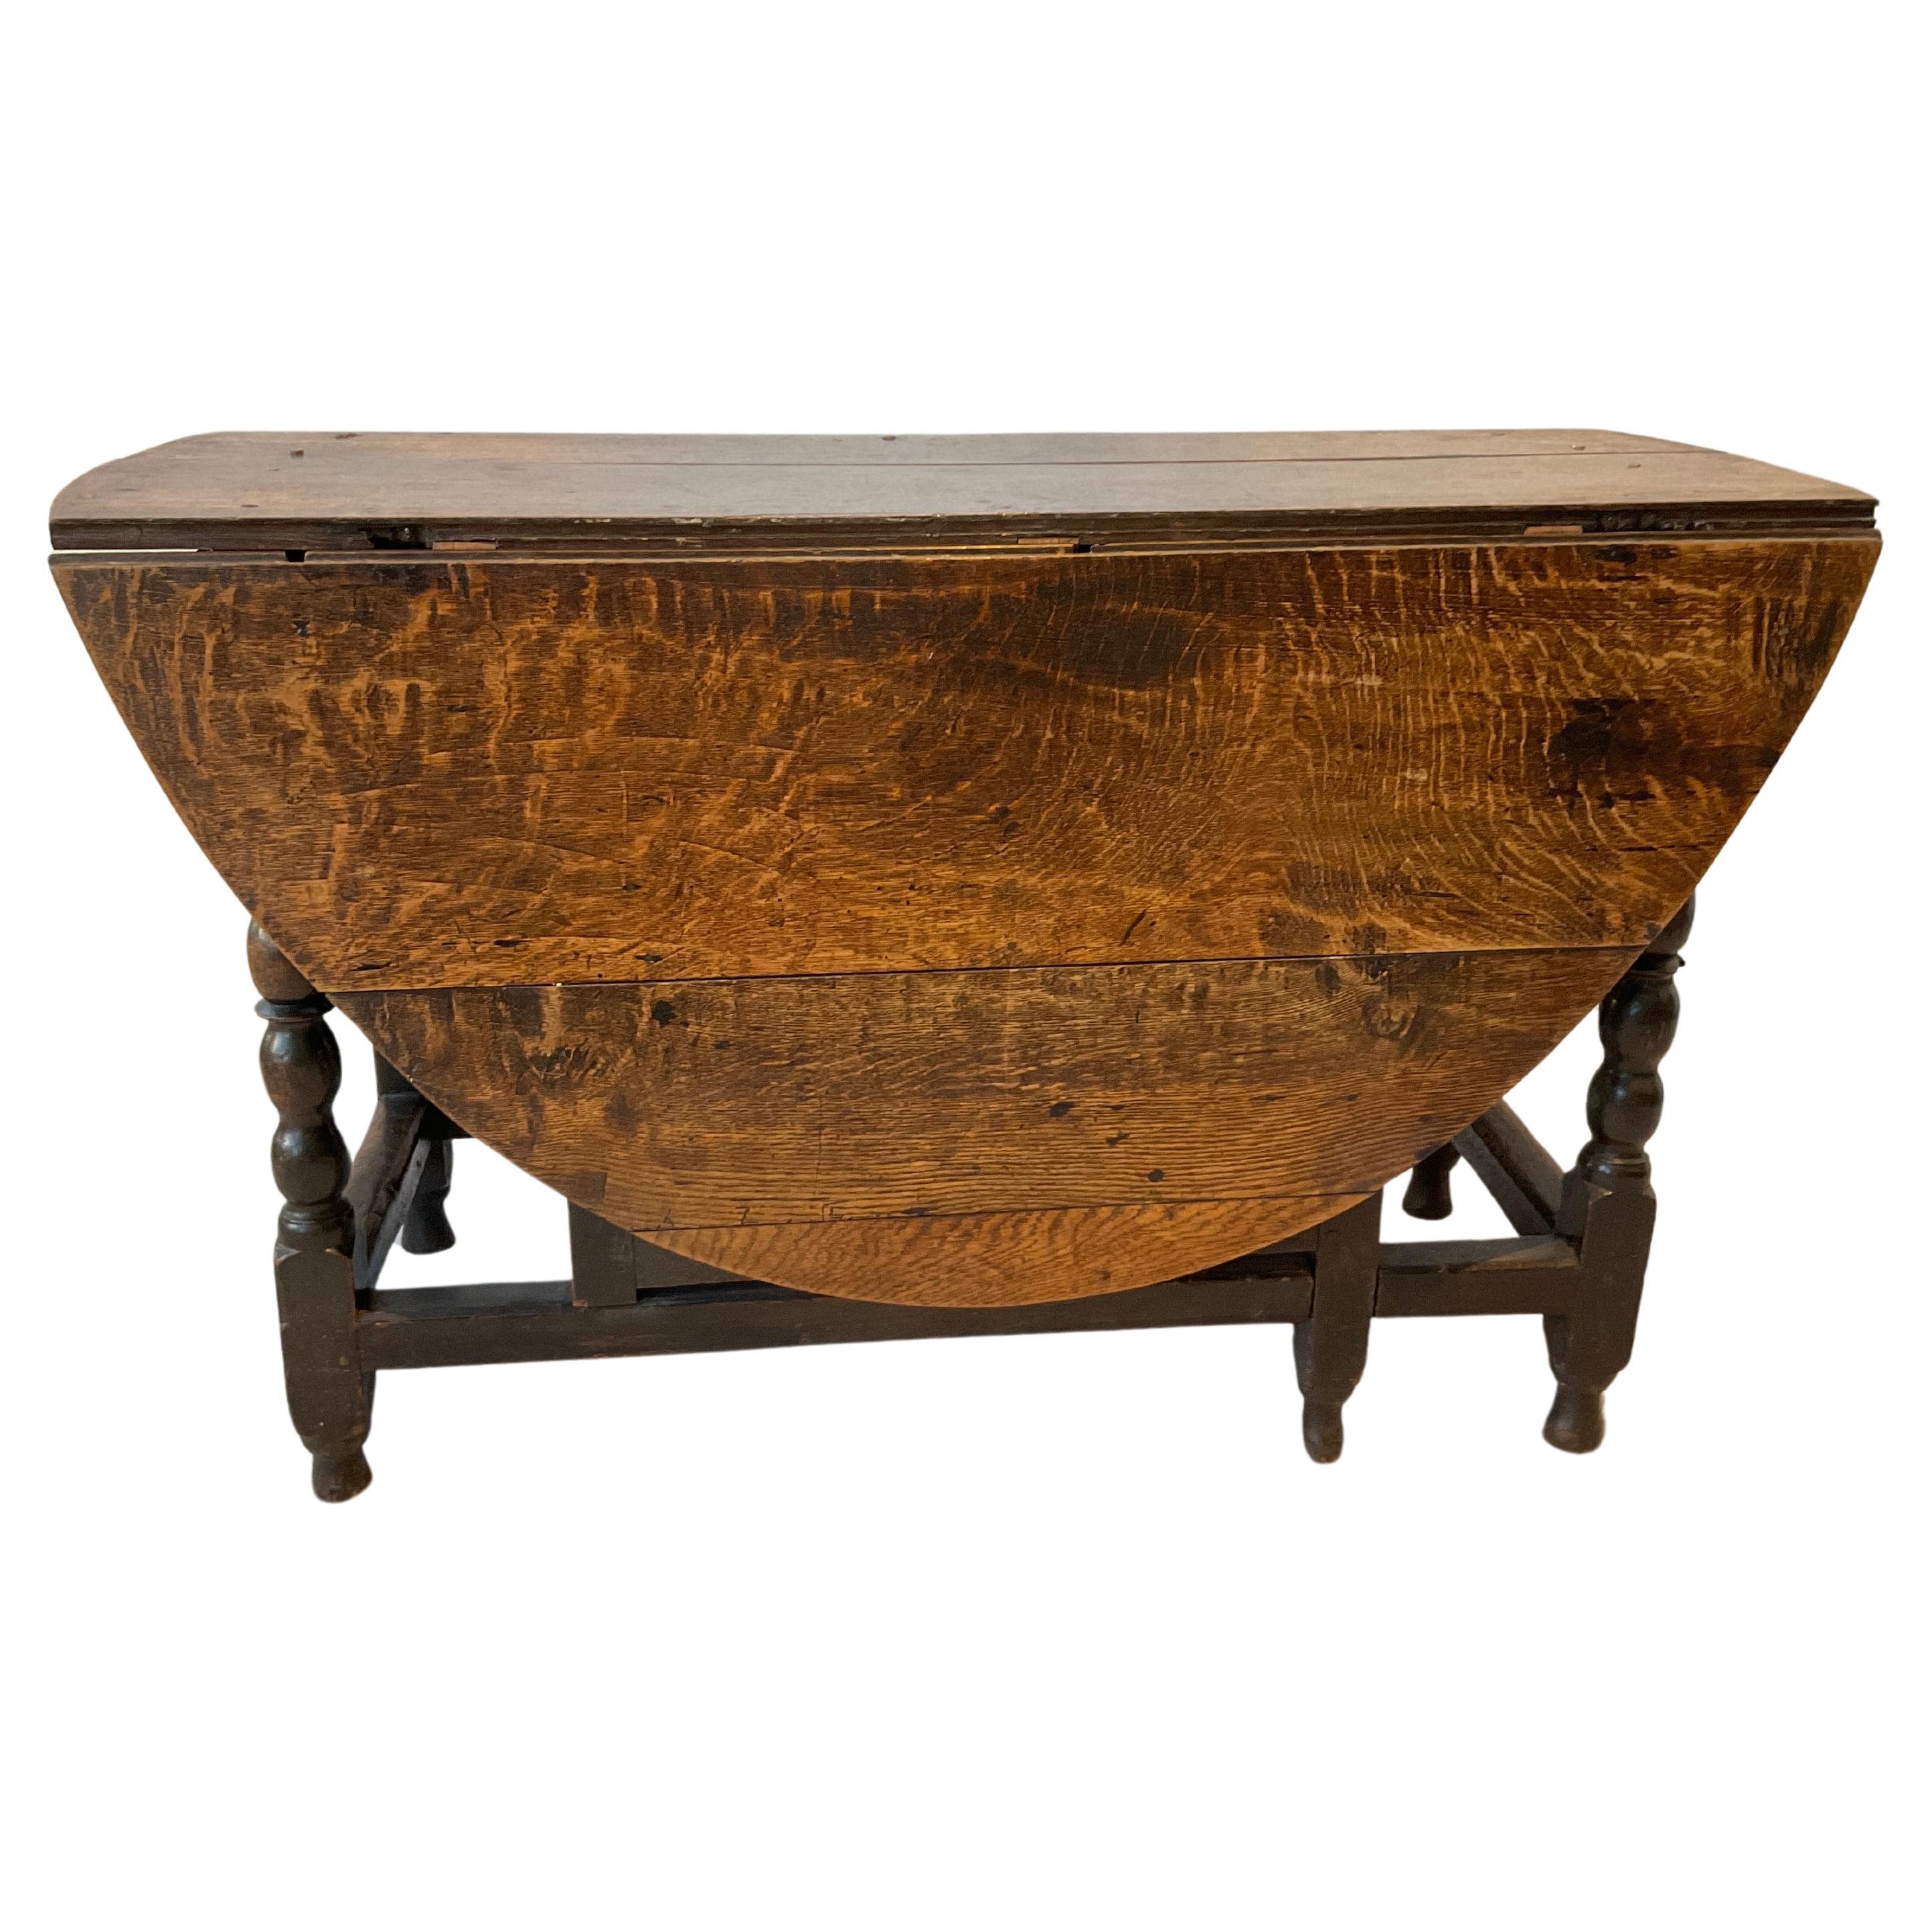 1820s English William And Mary Gateleg Table